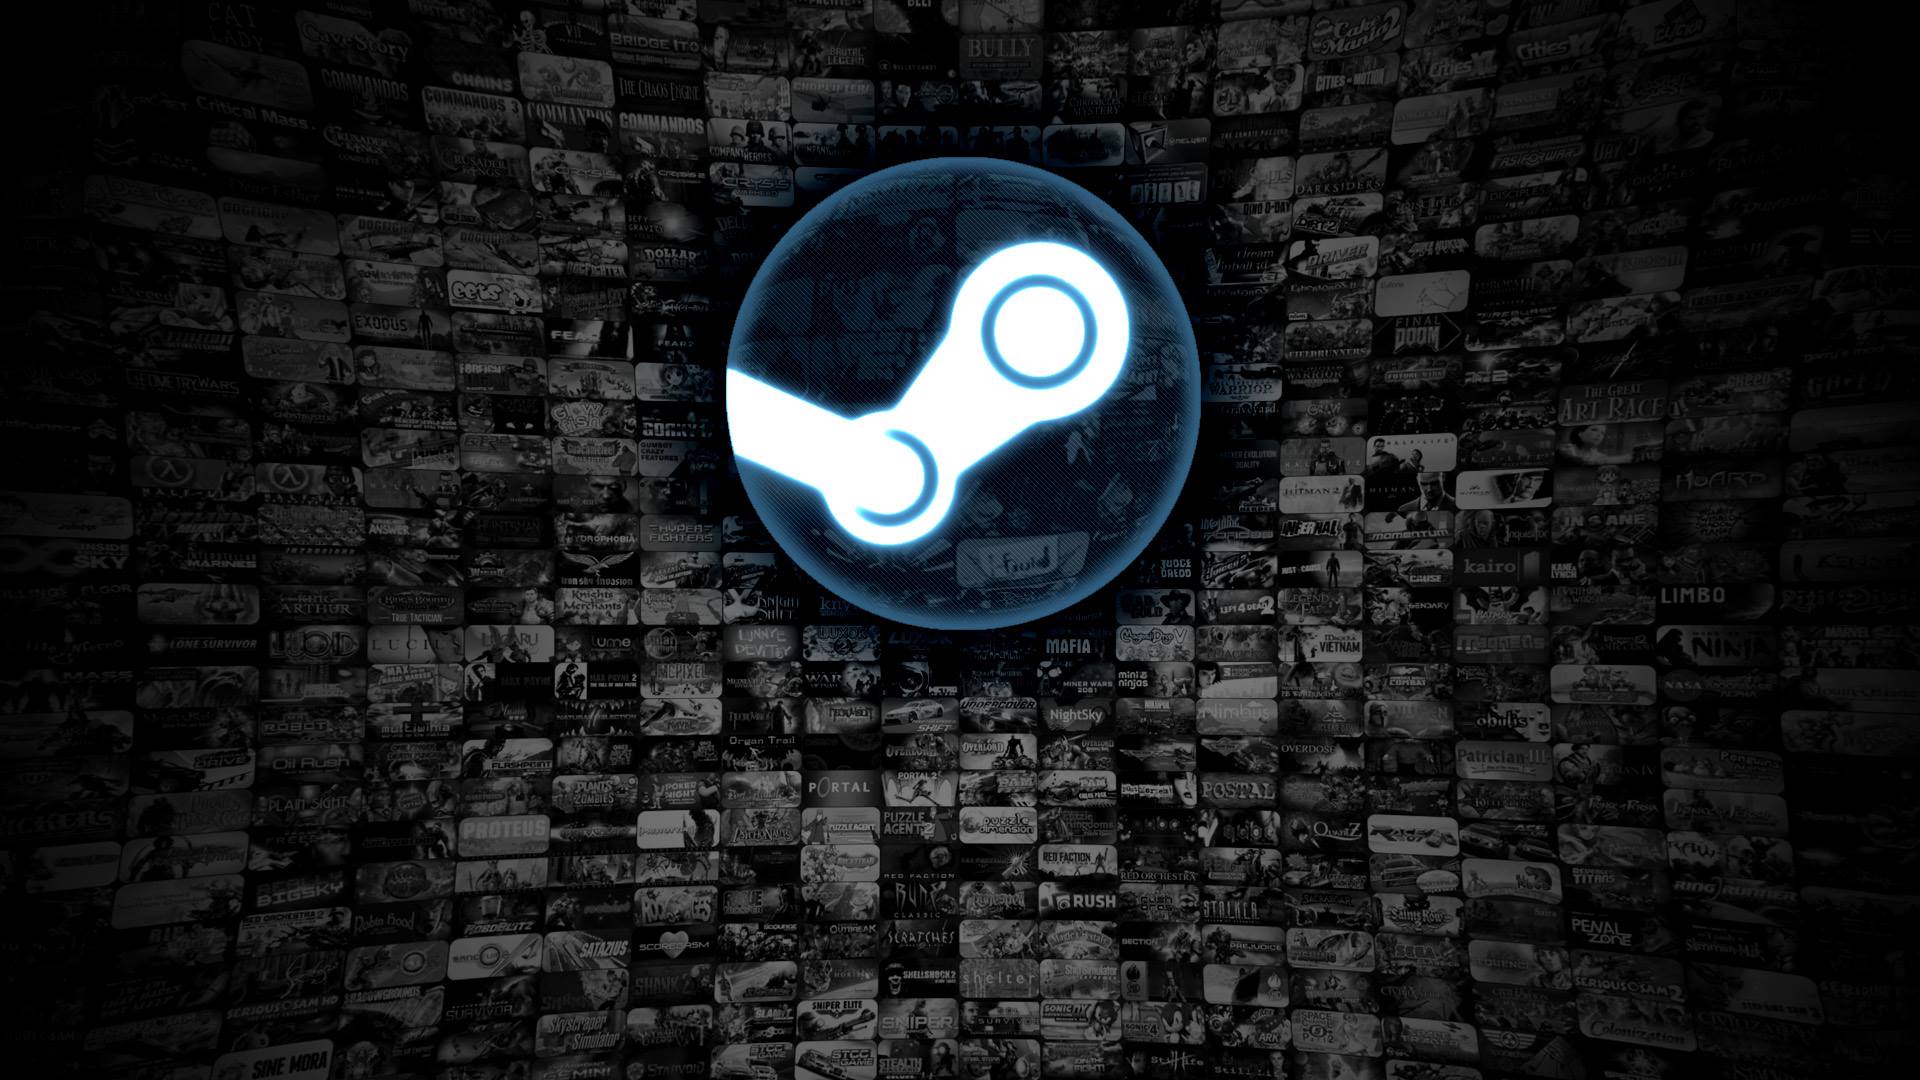 Steam Awards 2016, the winners have been decided